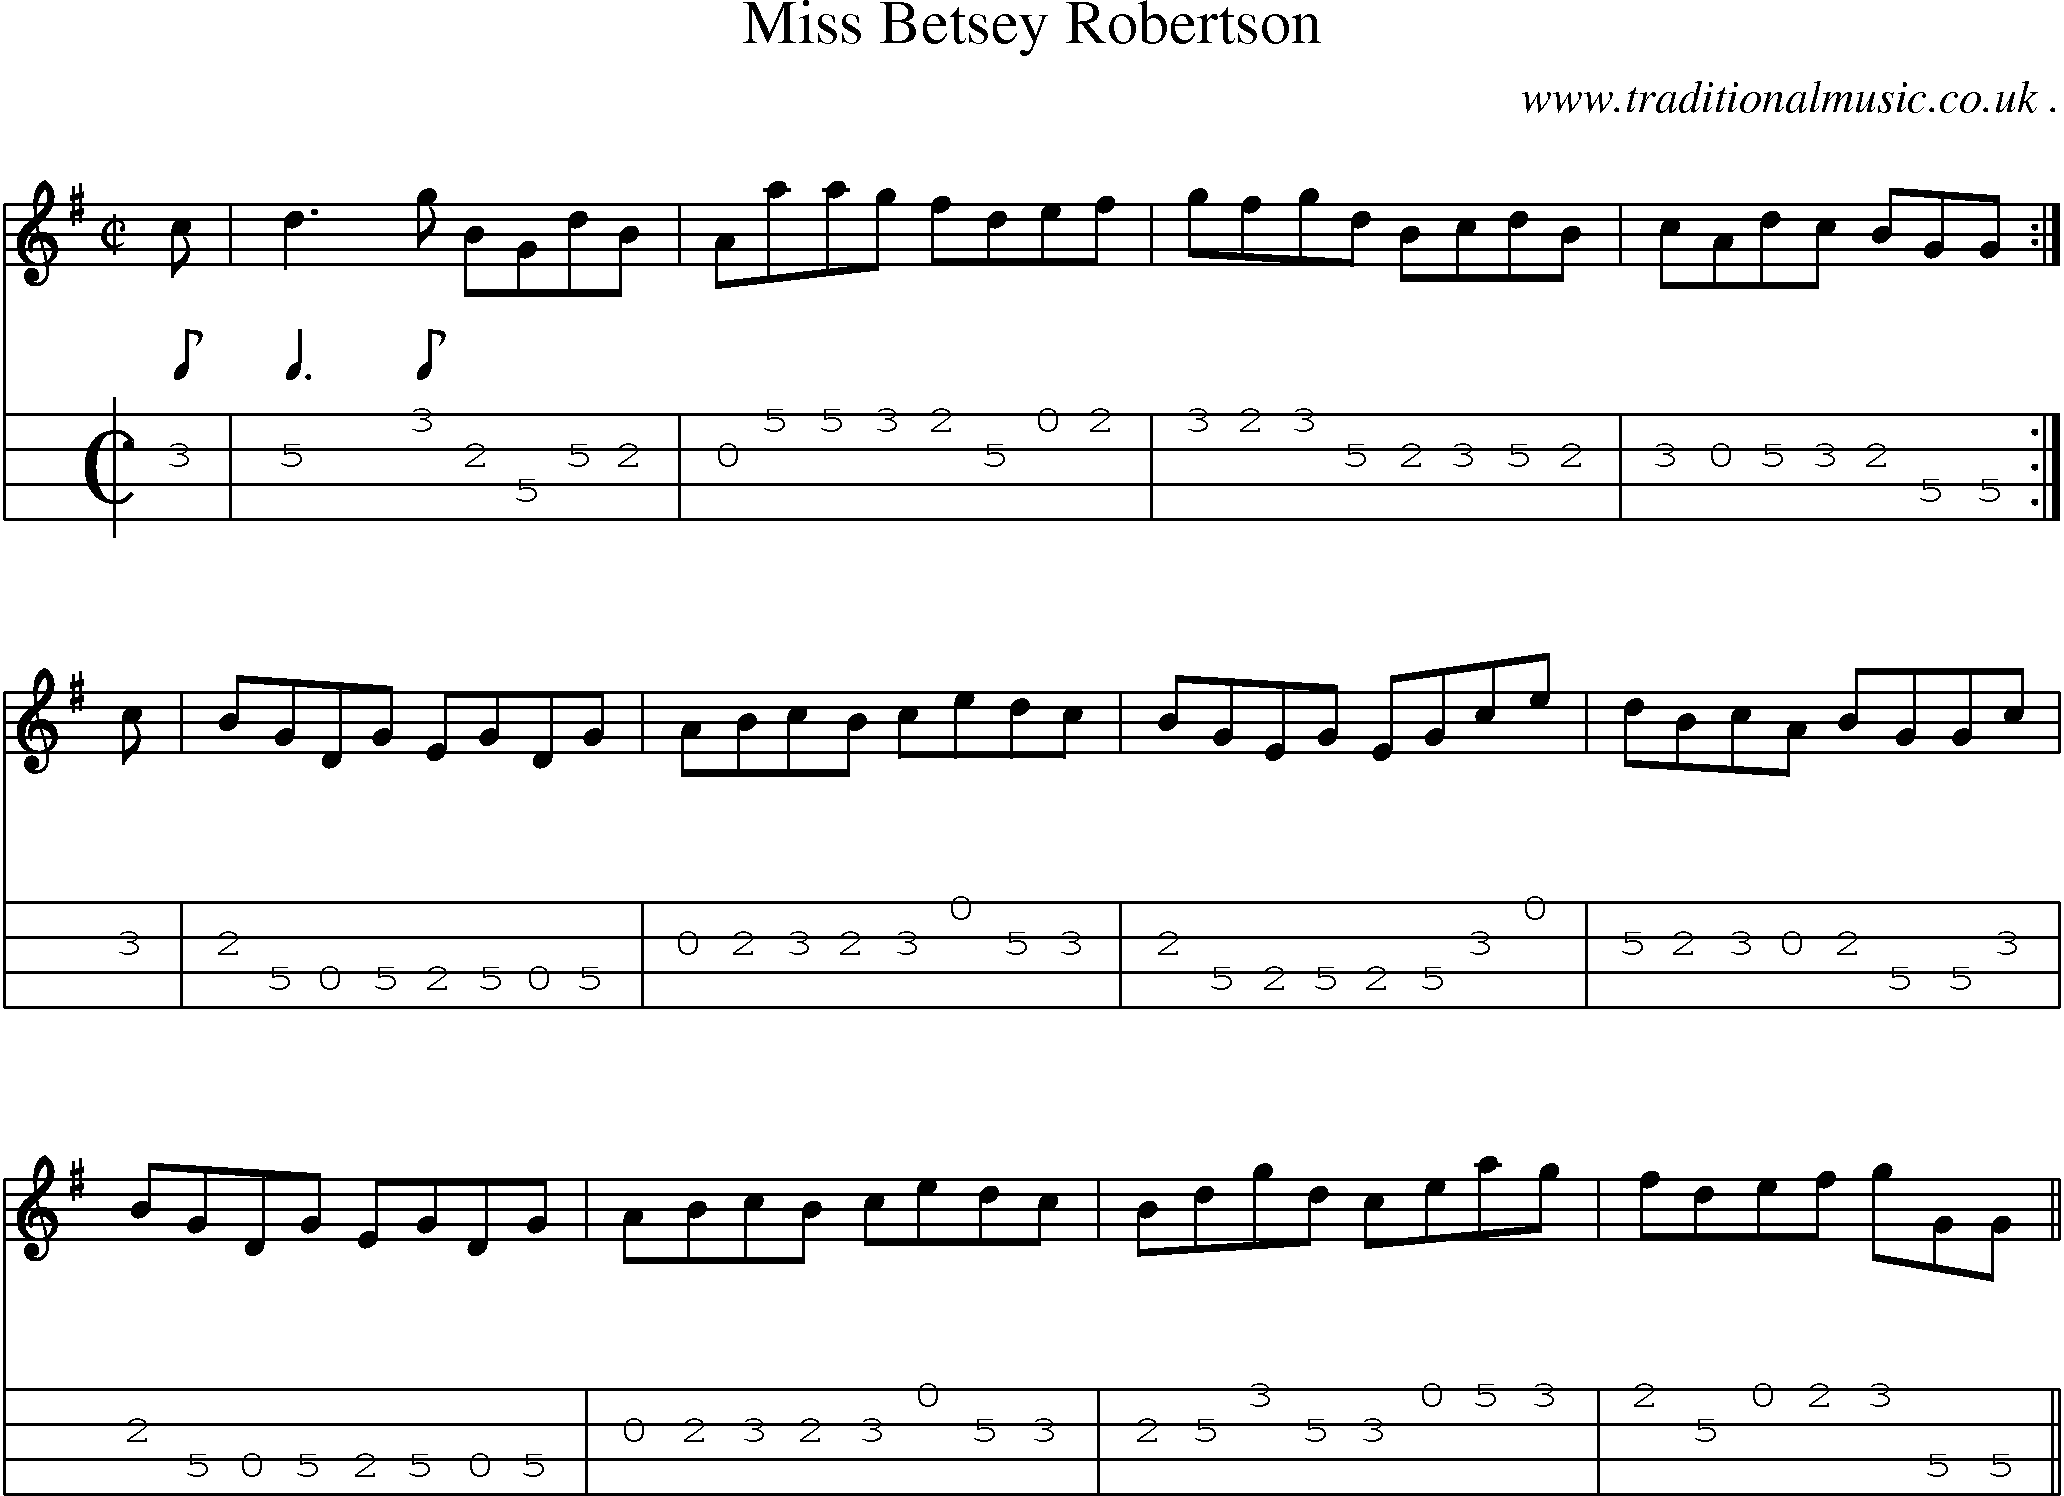 Sheet-music  score, Chords and Mandolin Tabs for Miss Betsey Robertson